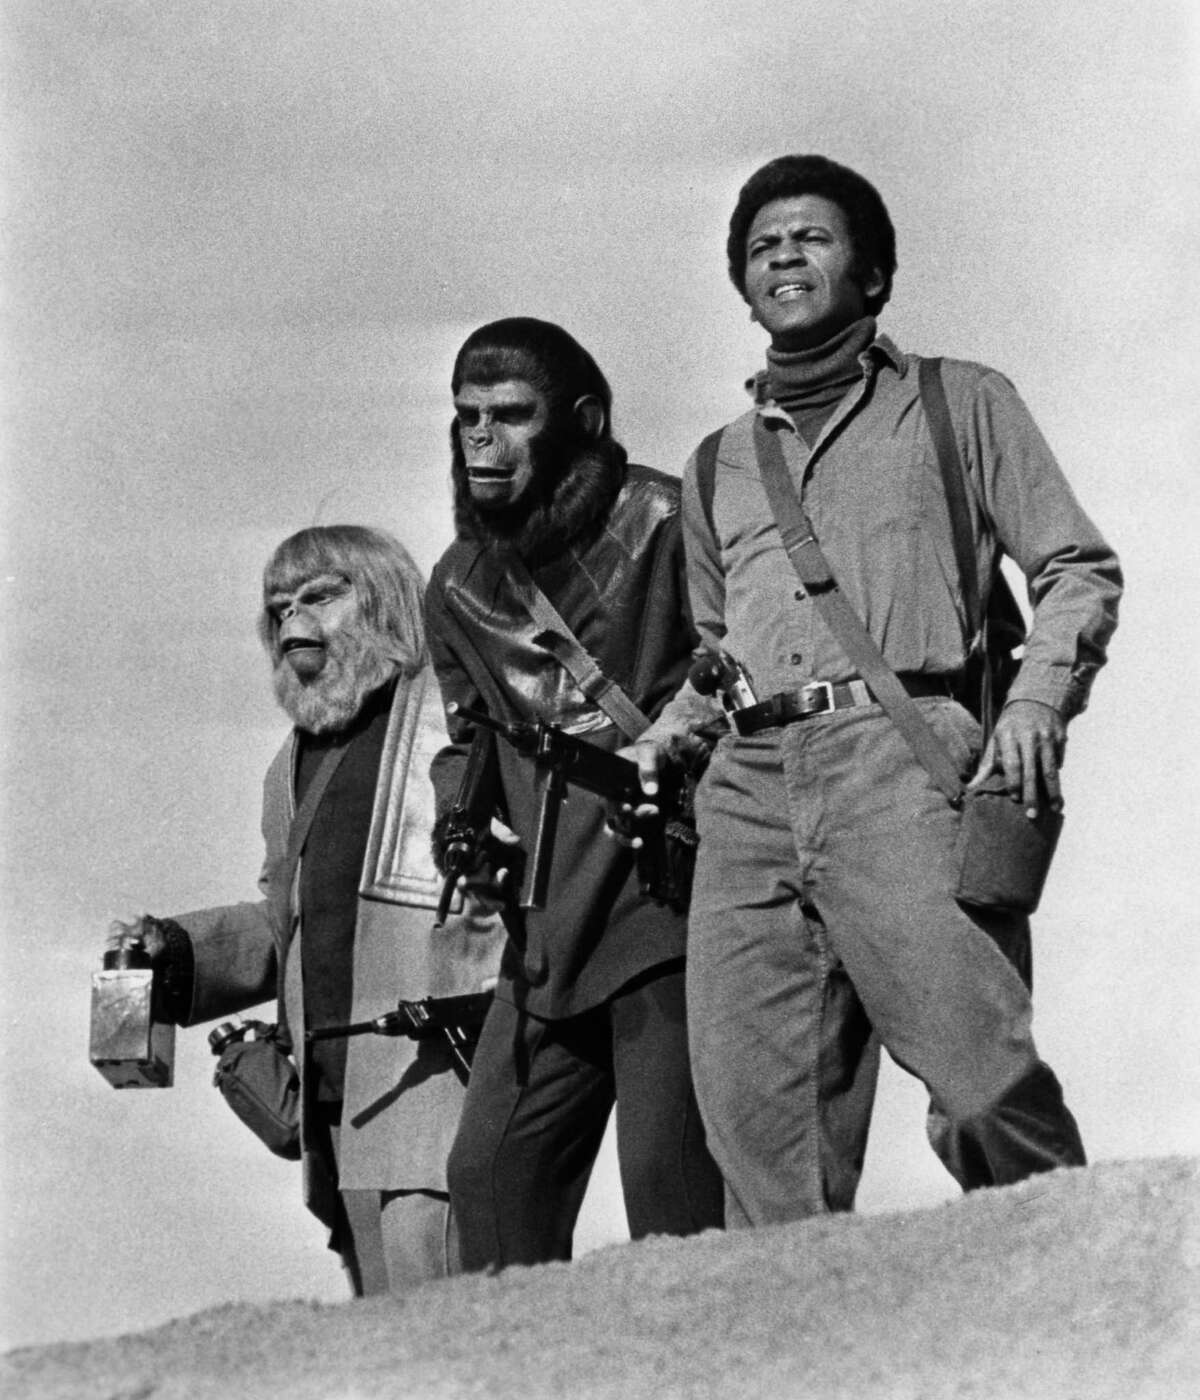 1973: "Battle for the Planet of the Apes" was the final movie in the original series. But with low budget quality, it could not do justice to the epic final battle between man and ape.